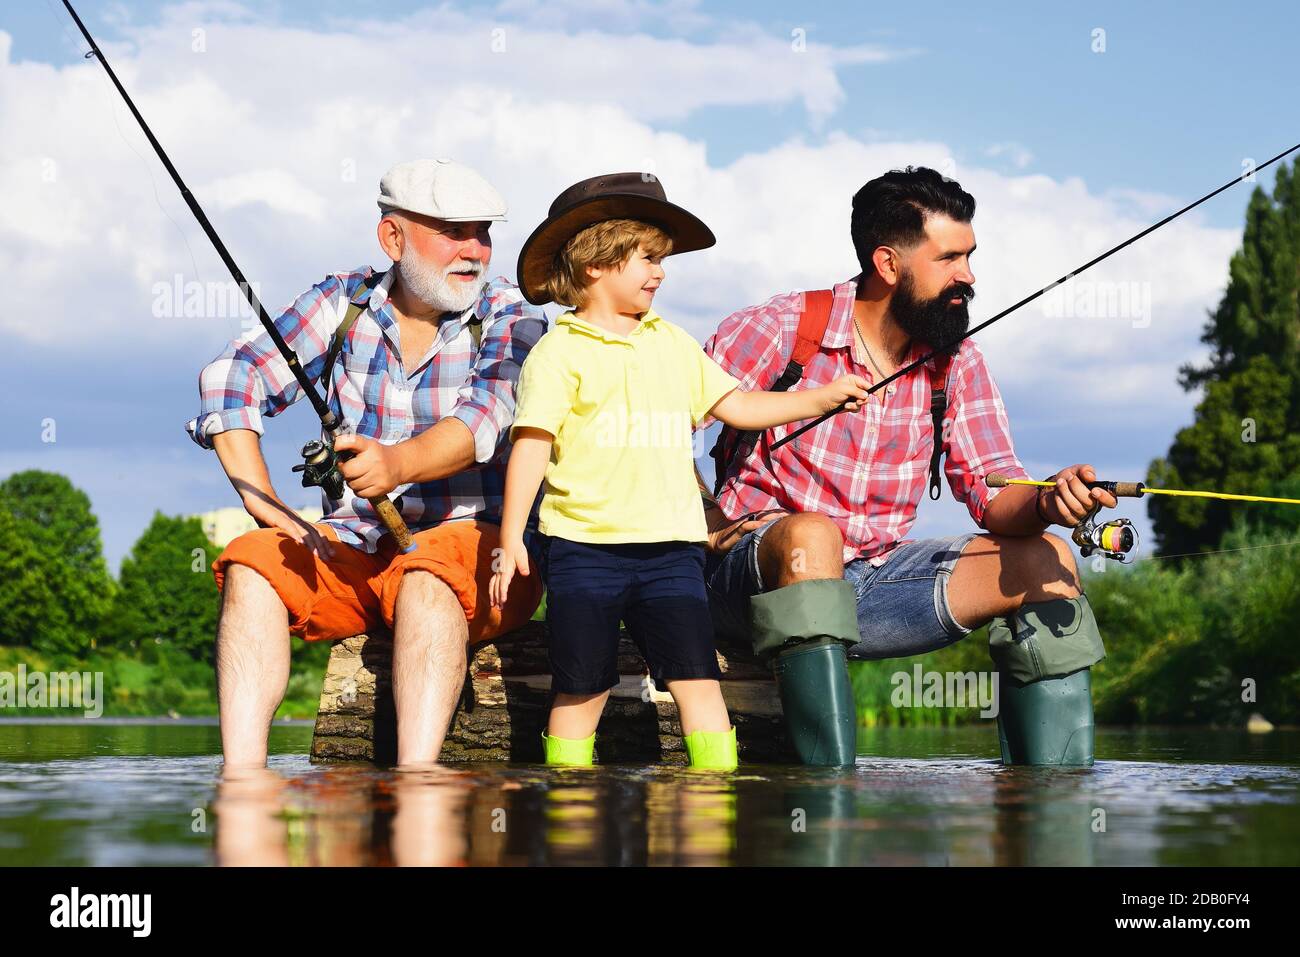 Funny happy little kid fishing on weekend. A fisherman boy stands in the  lake with a fishing rod and catches fish. Stock Photo